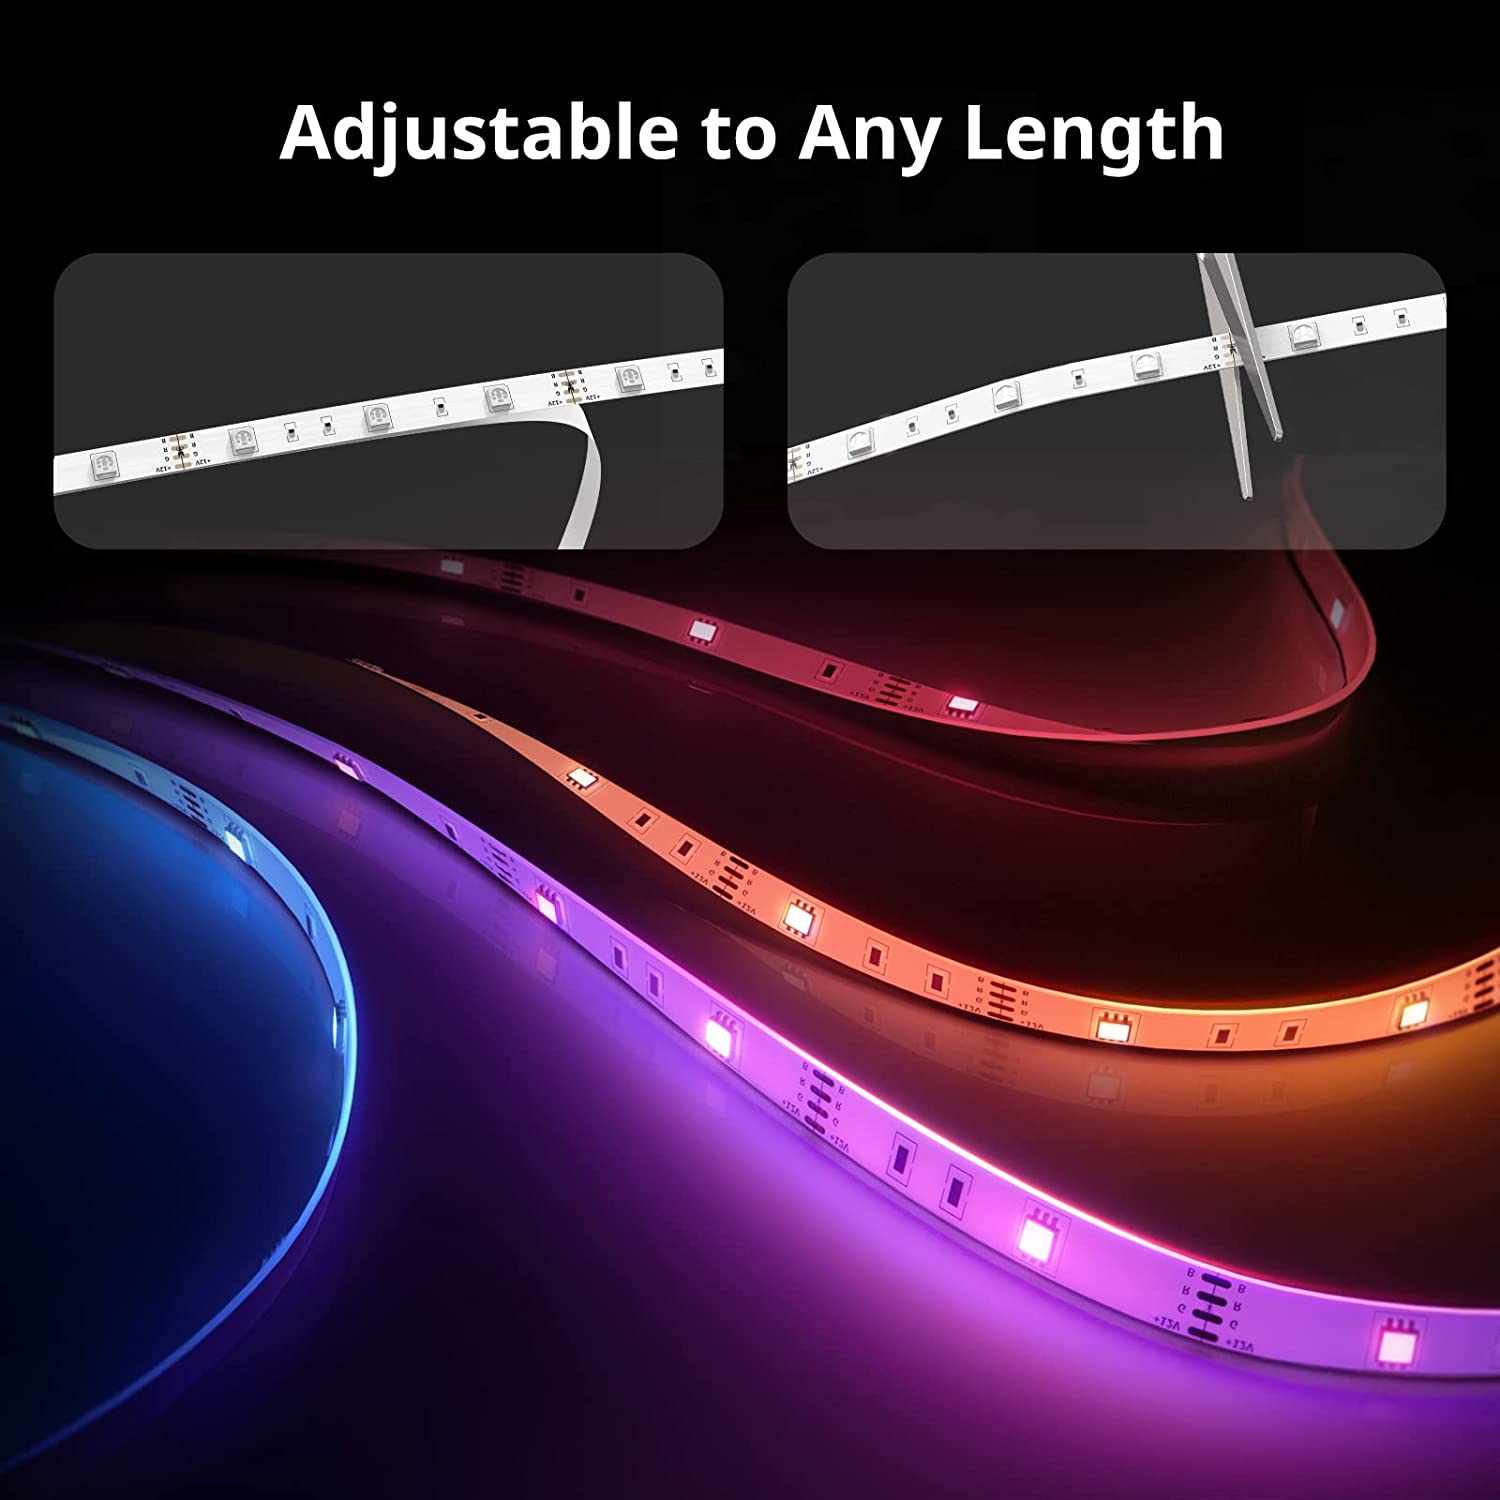 SwitchBot LED Strip Light, 5M | 16.4ft RGB, App Control, Work with Alexa and Google Assistant, 16 Million Colors with Remote Control and Music Sync